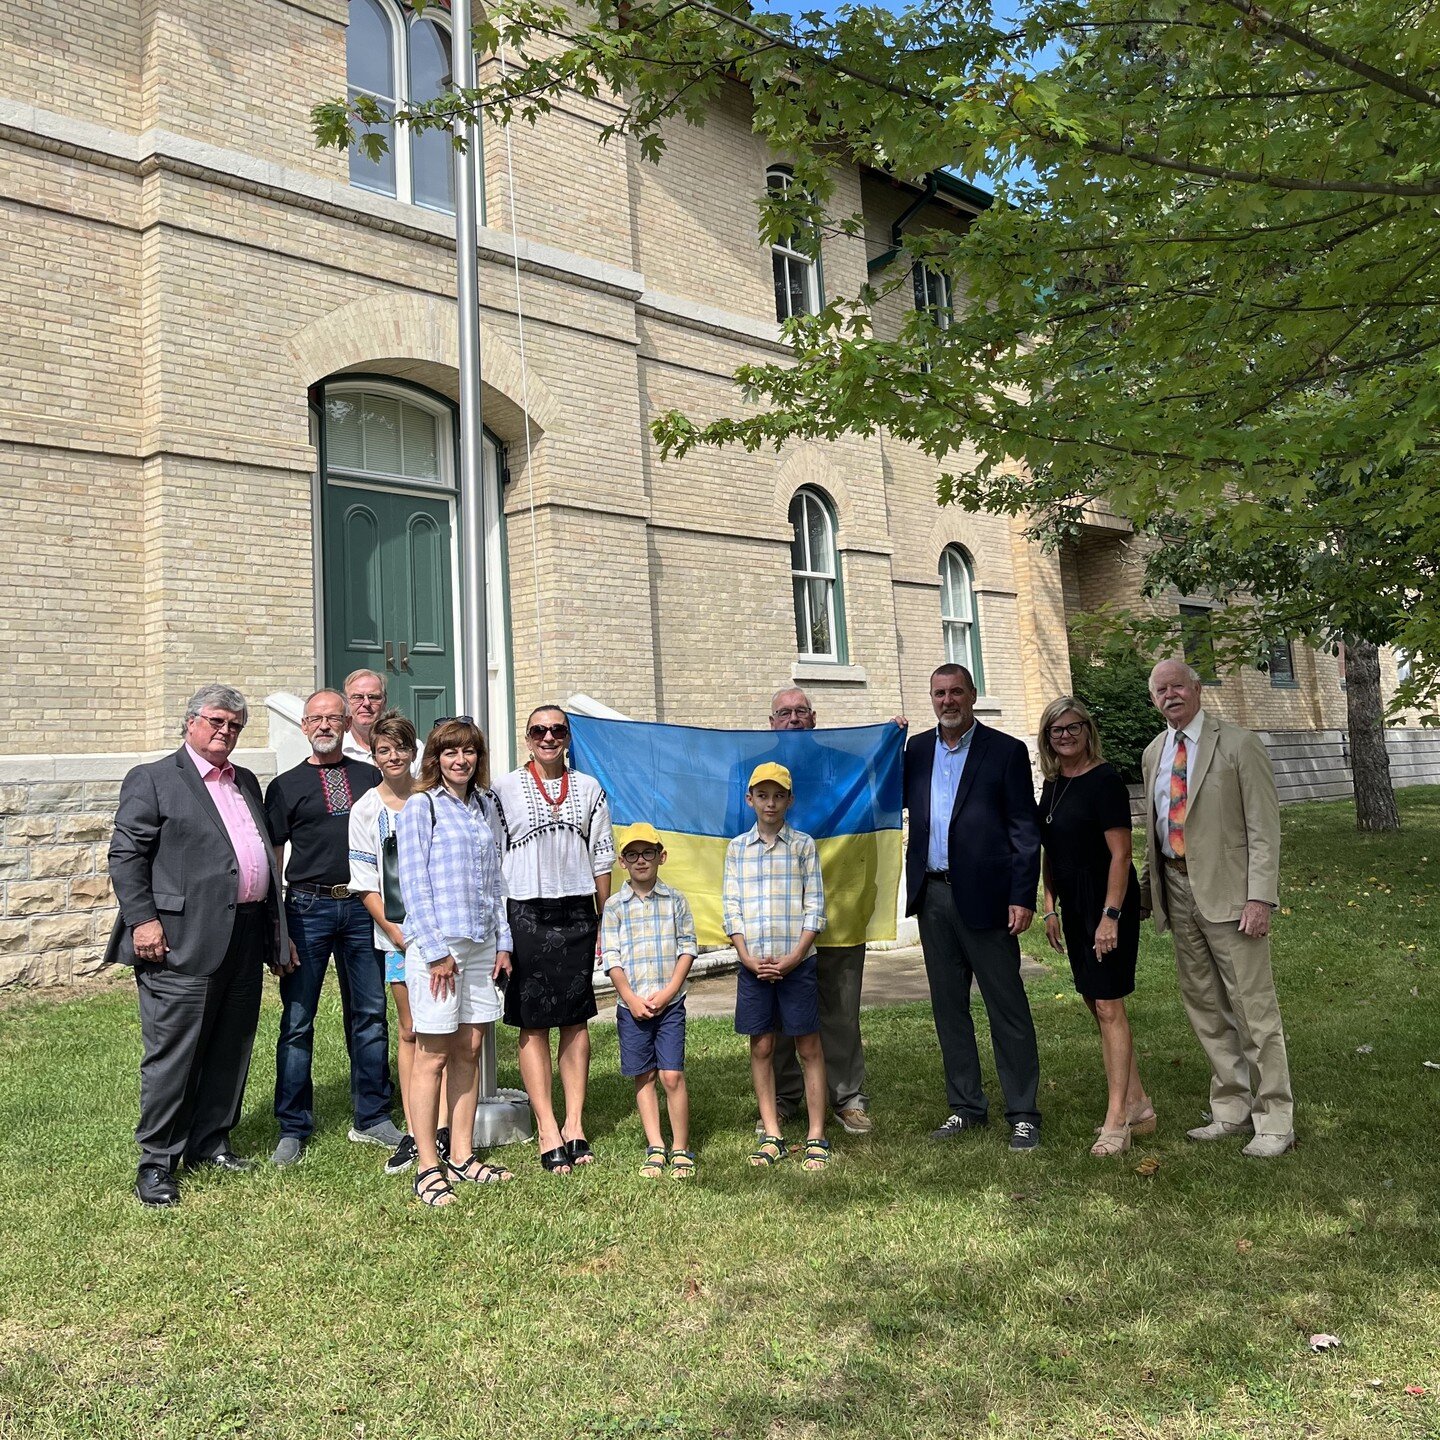 &quot;At City Hall on Tuesday morning, the Mayor &amp; Councillors were joined by Alex Shulyarenko, member of the Ukrainian Canadian Congress (UCC) &amp; his family along with local Ukrainian community members for a flag raising event.

In Ukraine, A